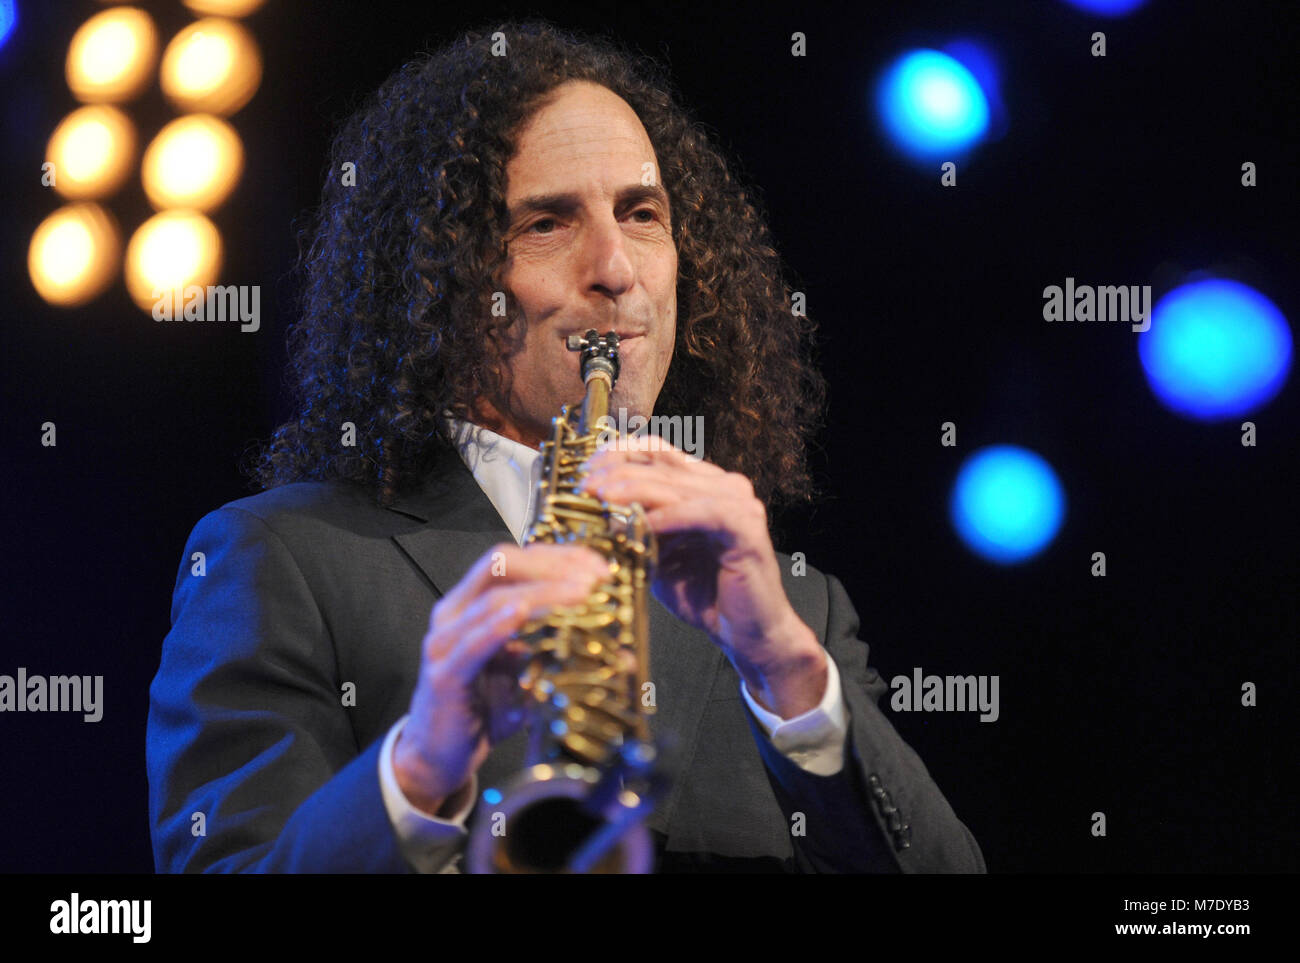 NEW YORK, NY - JANUARY 14: Saxophonist Kenny G performs outside Hard Rock Cafe, Times Square on January 14, 2014 in New York City  People:  Kenny G Stock Photo